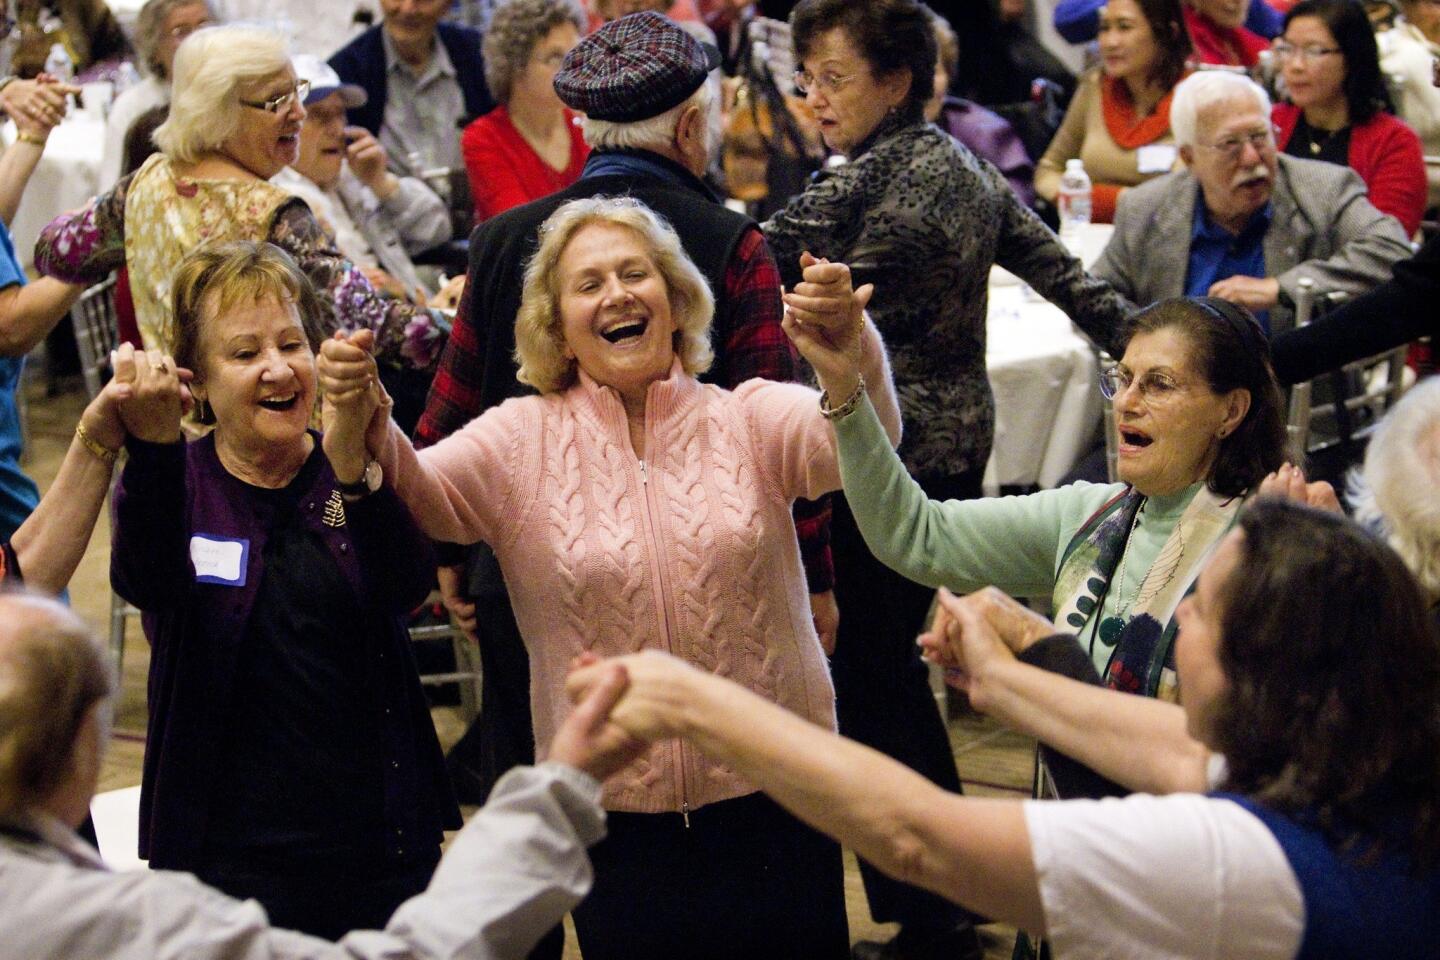 People dance at the annual Hanukkah party at Temple Emanuel of Beverly Hills.